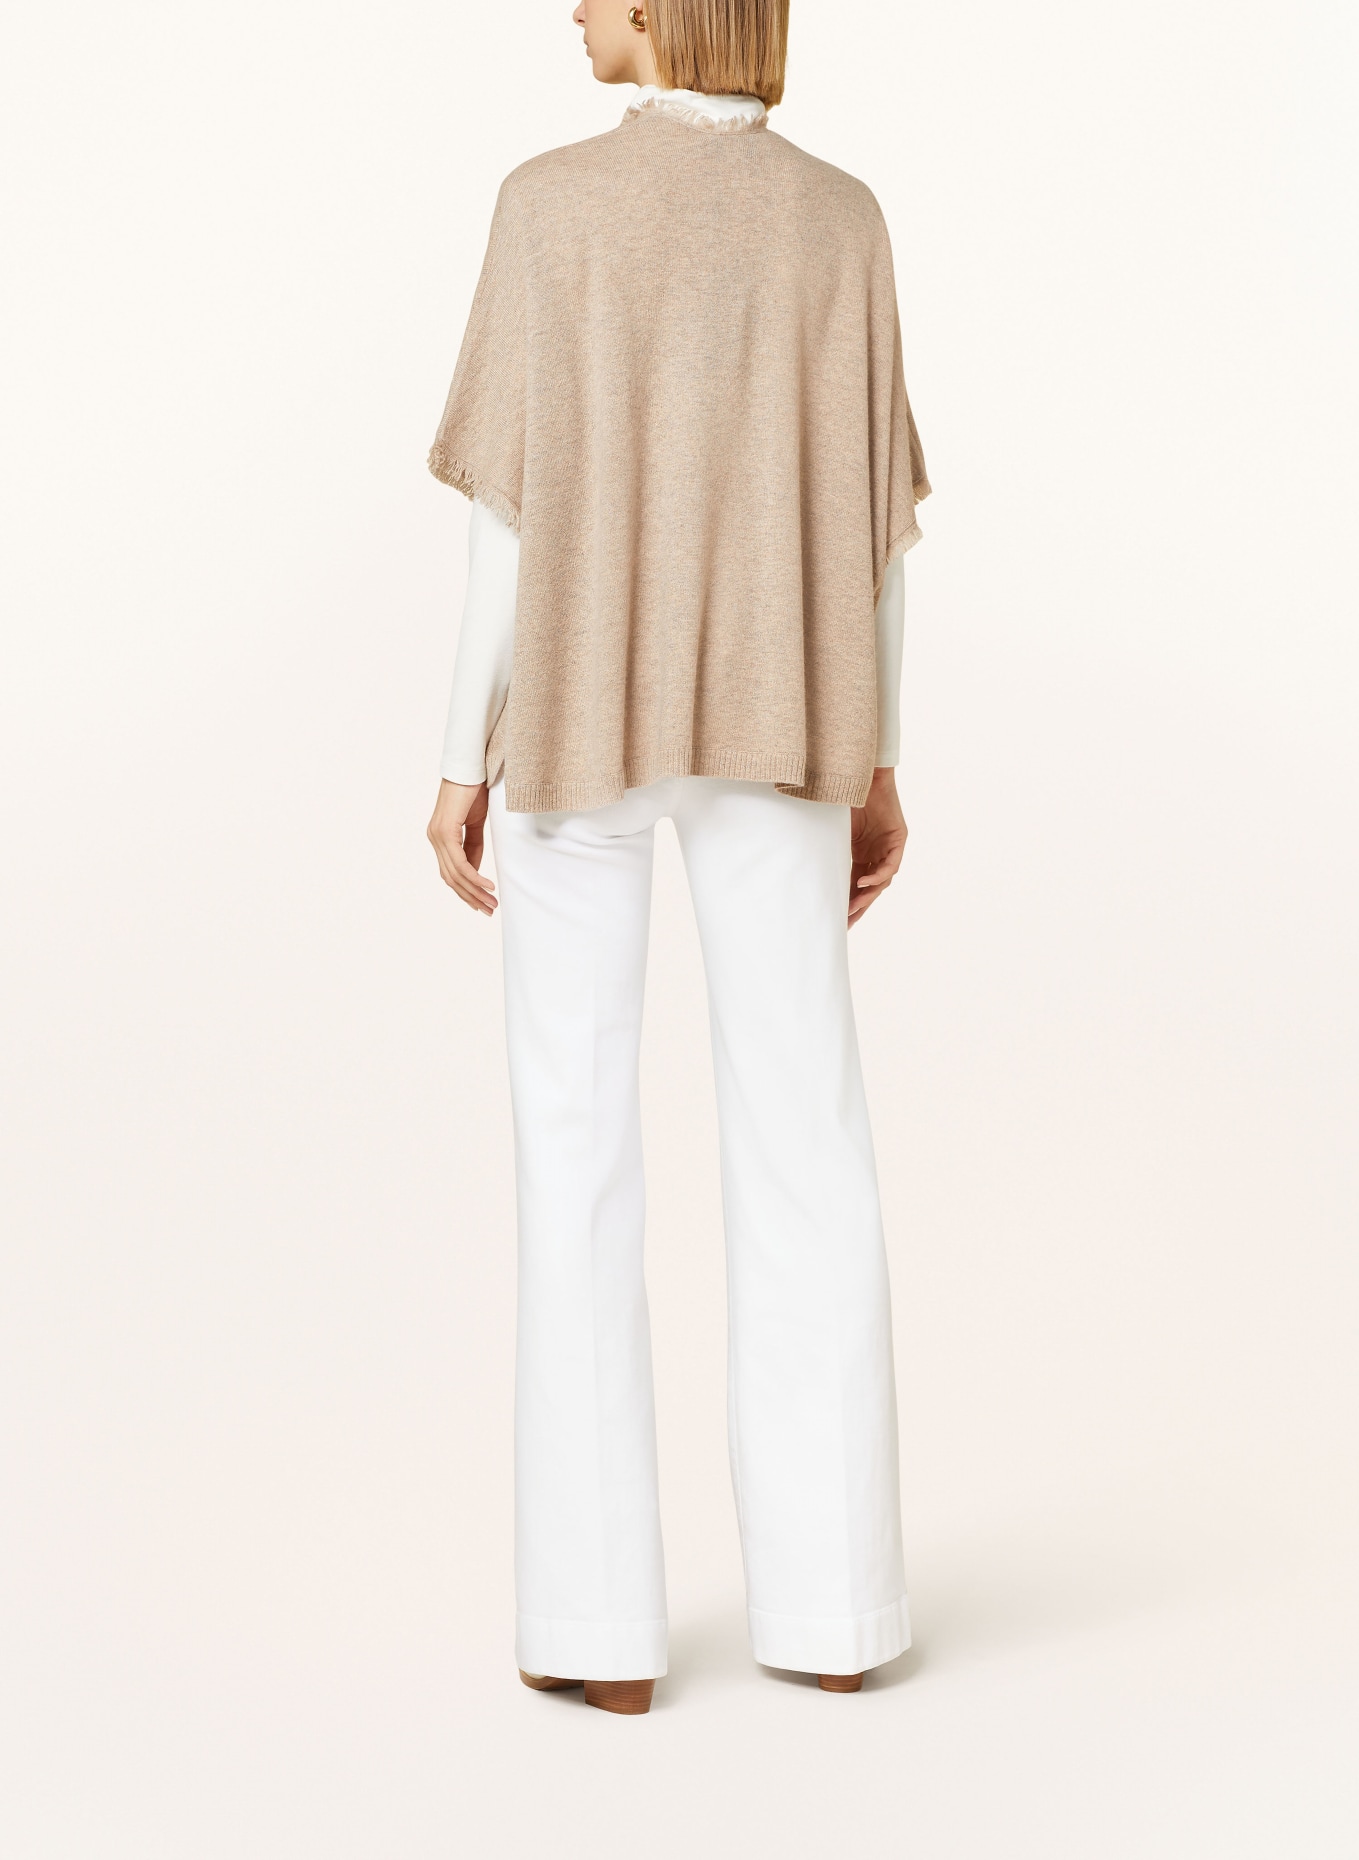 REPEAT Knit cardigan made of cashmere, Color: BEIGE (Image 3)